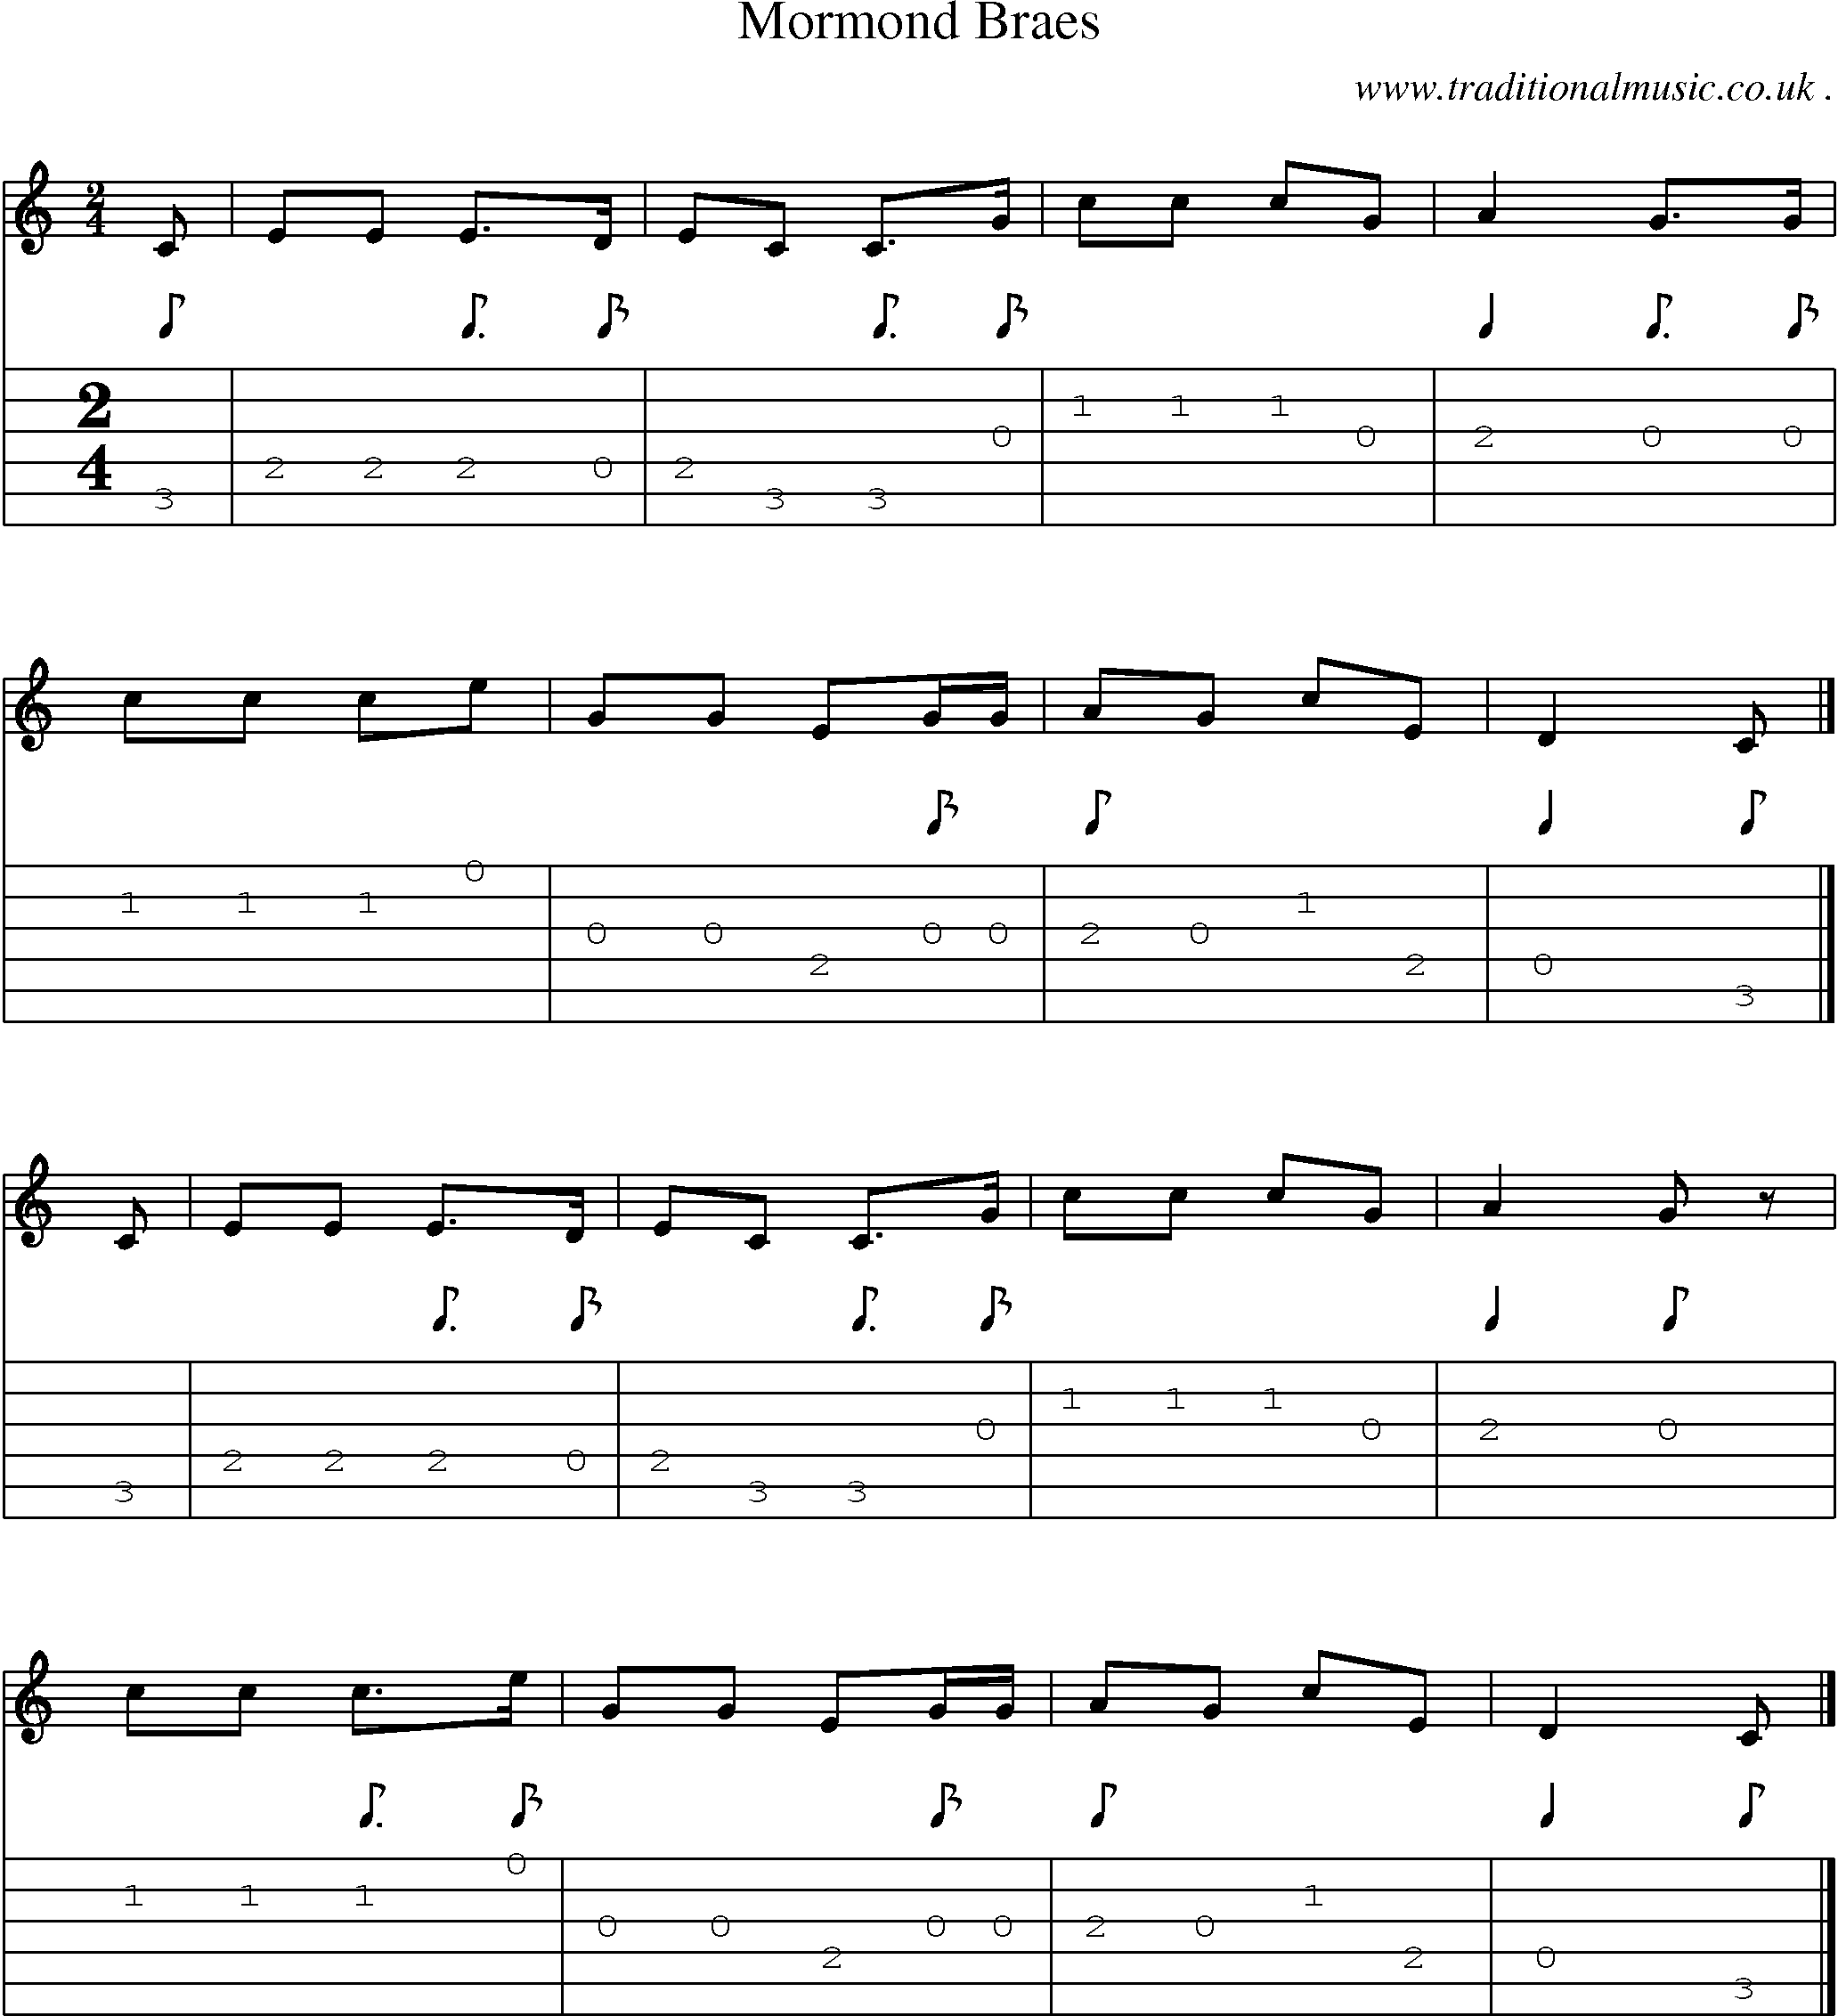 Sheet-music  score, Chords and Guitar Tabs for Mormond Braes